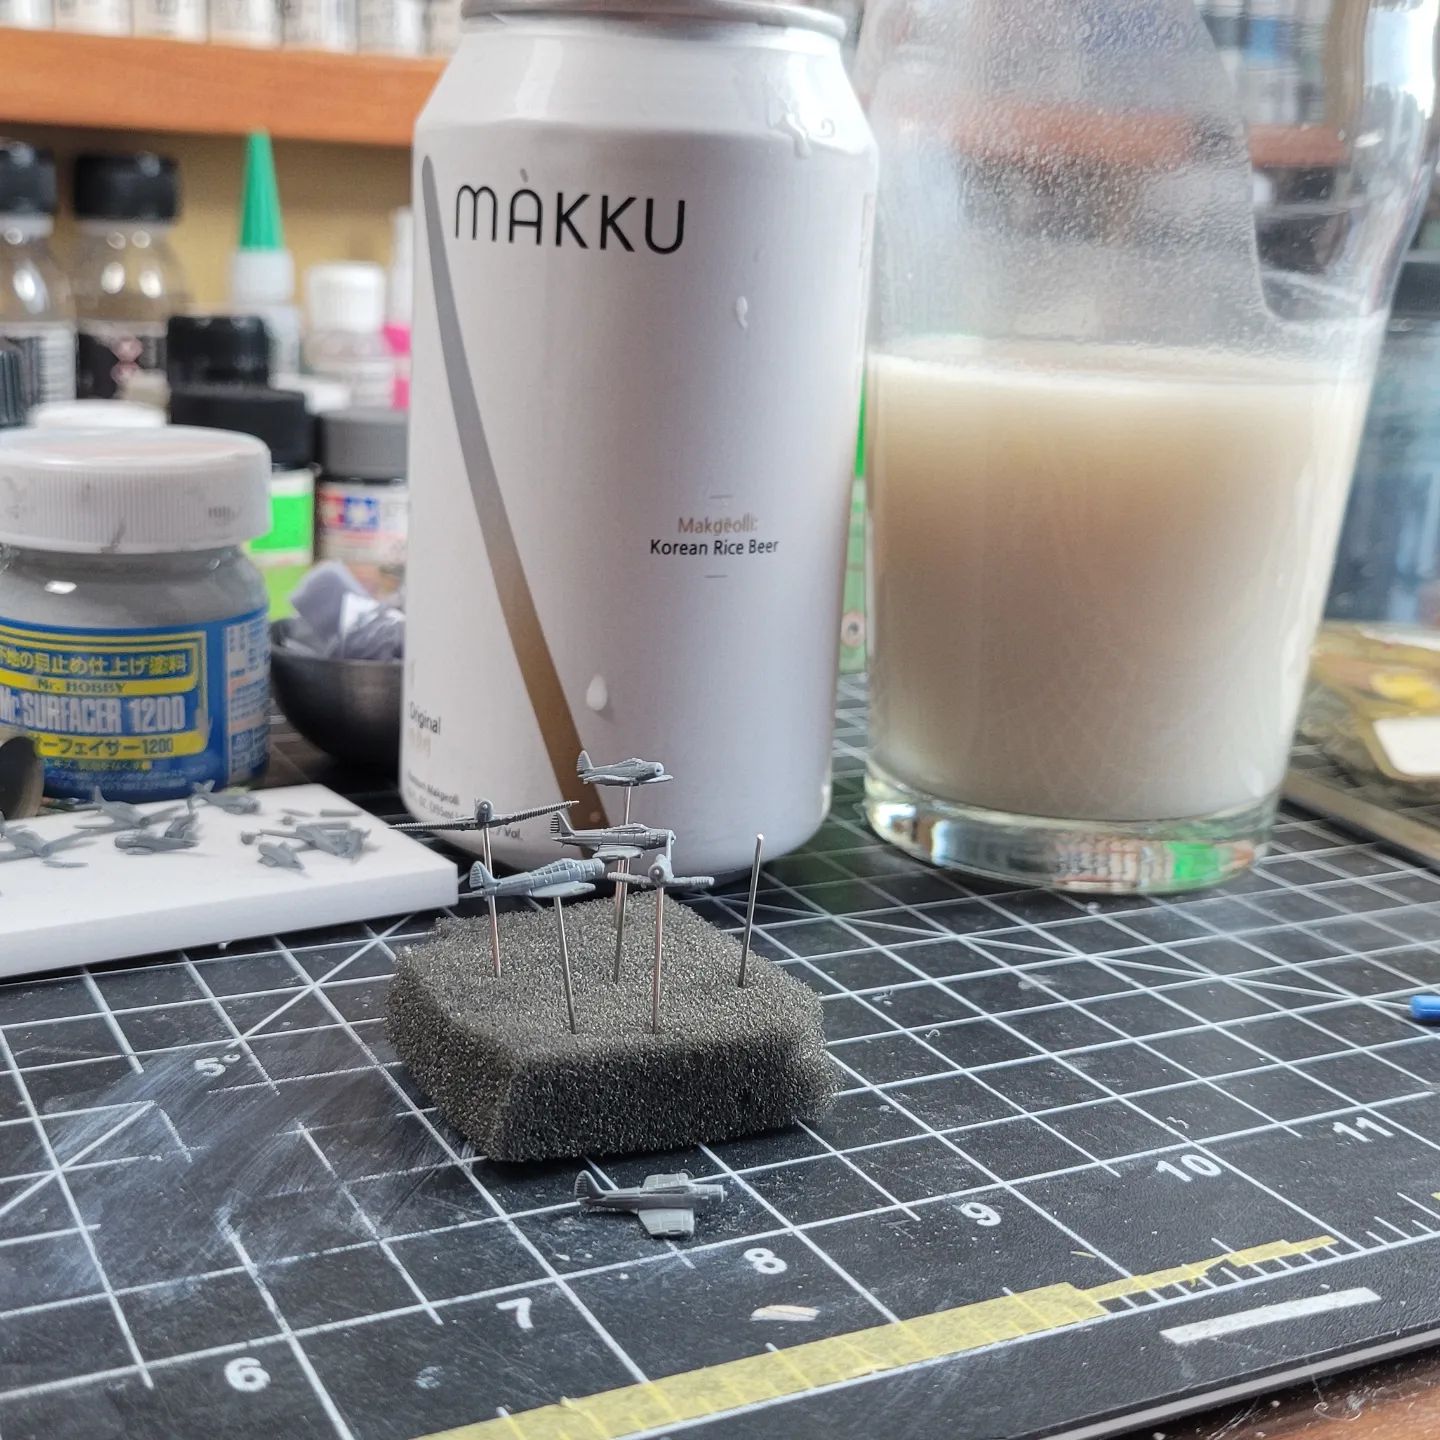 I'm awaiting a new airbrush, so I've switched from working on Emterprise herself, to more effort on her airgroup. Small gaps to be filled, so Mr Surfacer to the rescue. The beer is Korean rice beer, which is very white, but quite nice. I wouldn't really classify it as beer, rather more of a carbonated, unfiltered, sake. Unique.